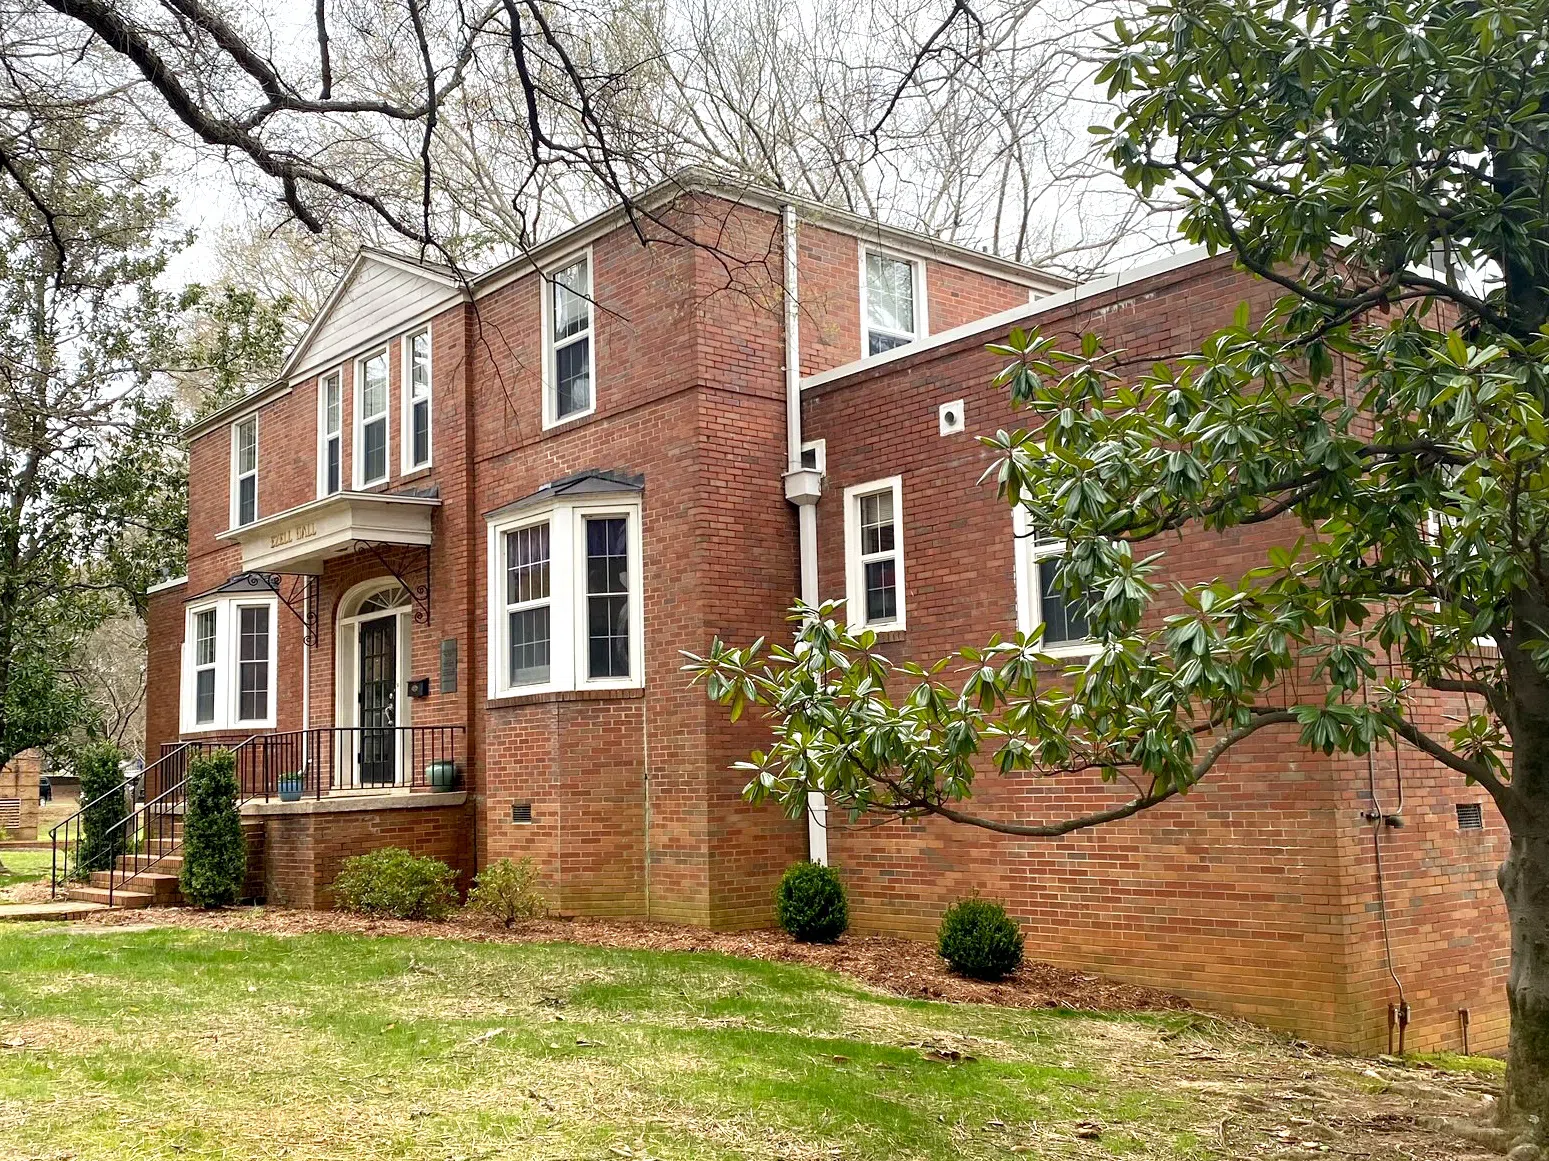 Two-story brick building with covered porch over the landing area at the top of stairs. A magnolia tree branch is seen in the foreground to the right.